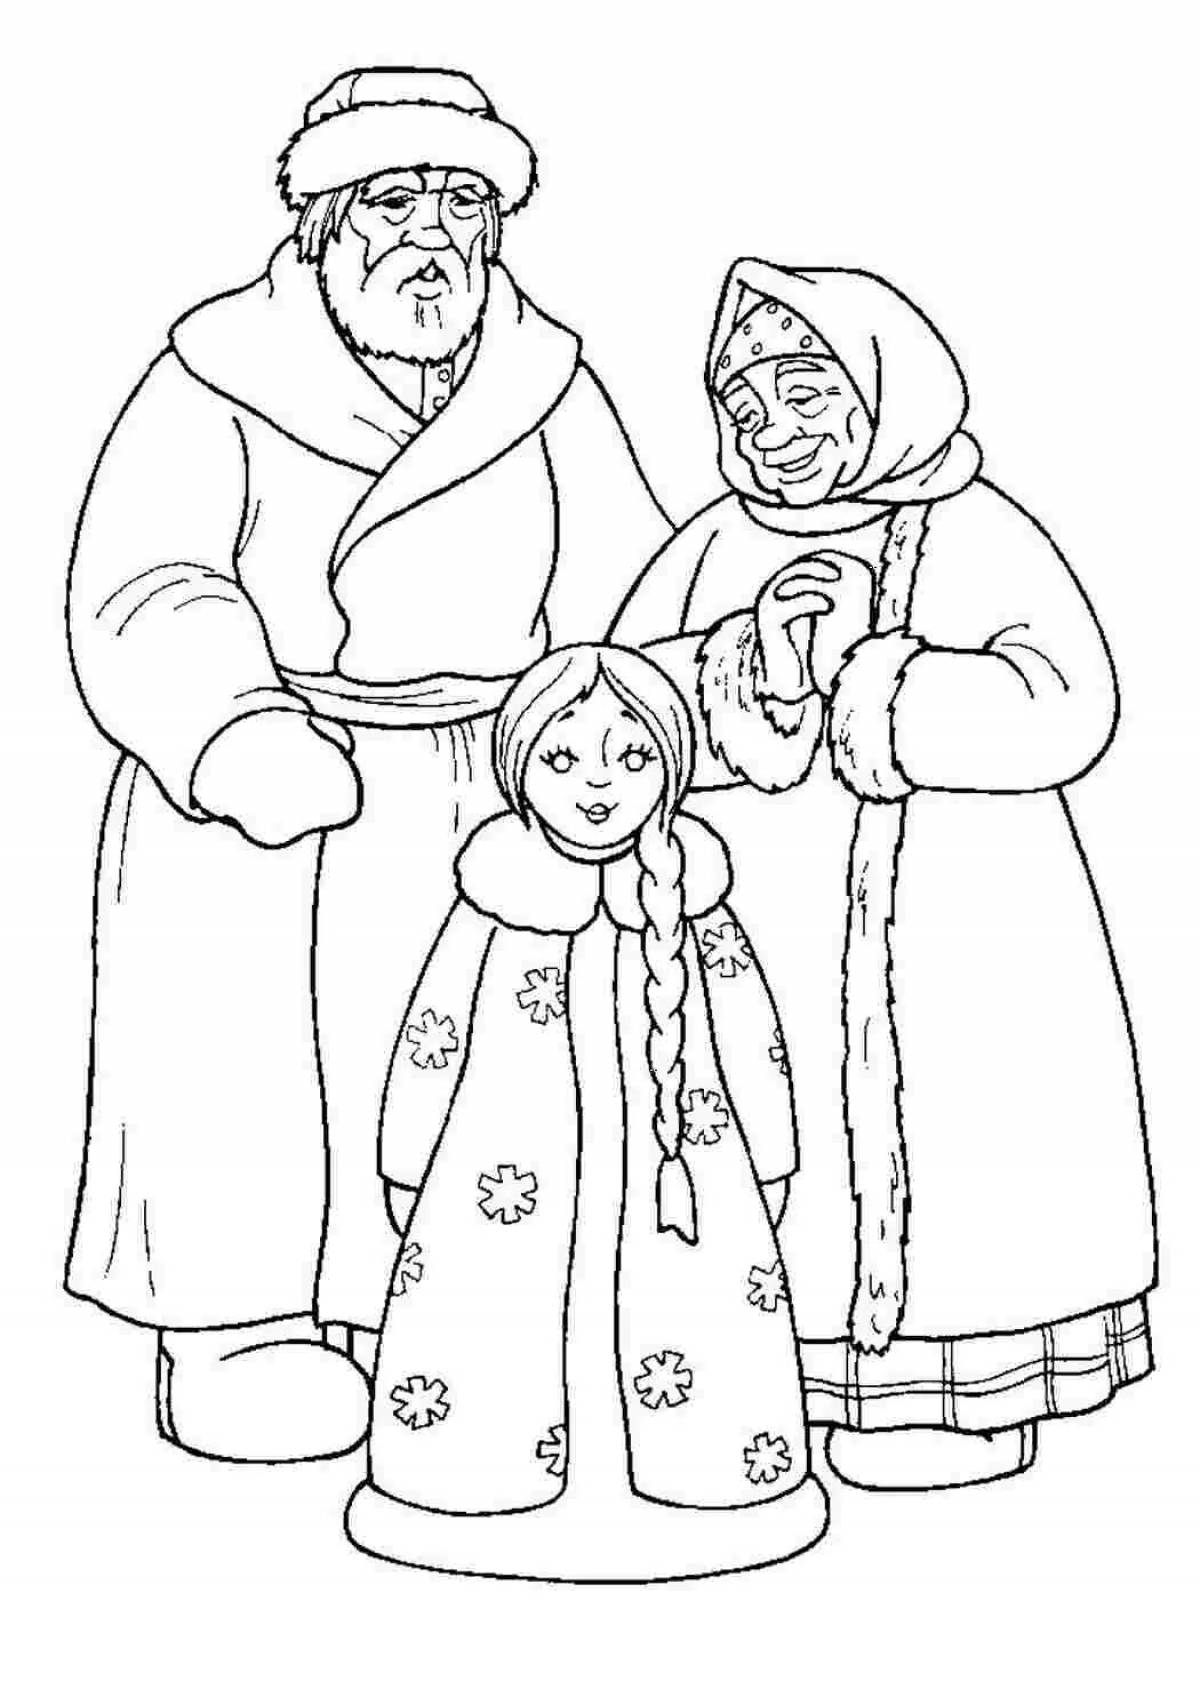 Old woman winter #10